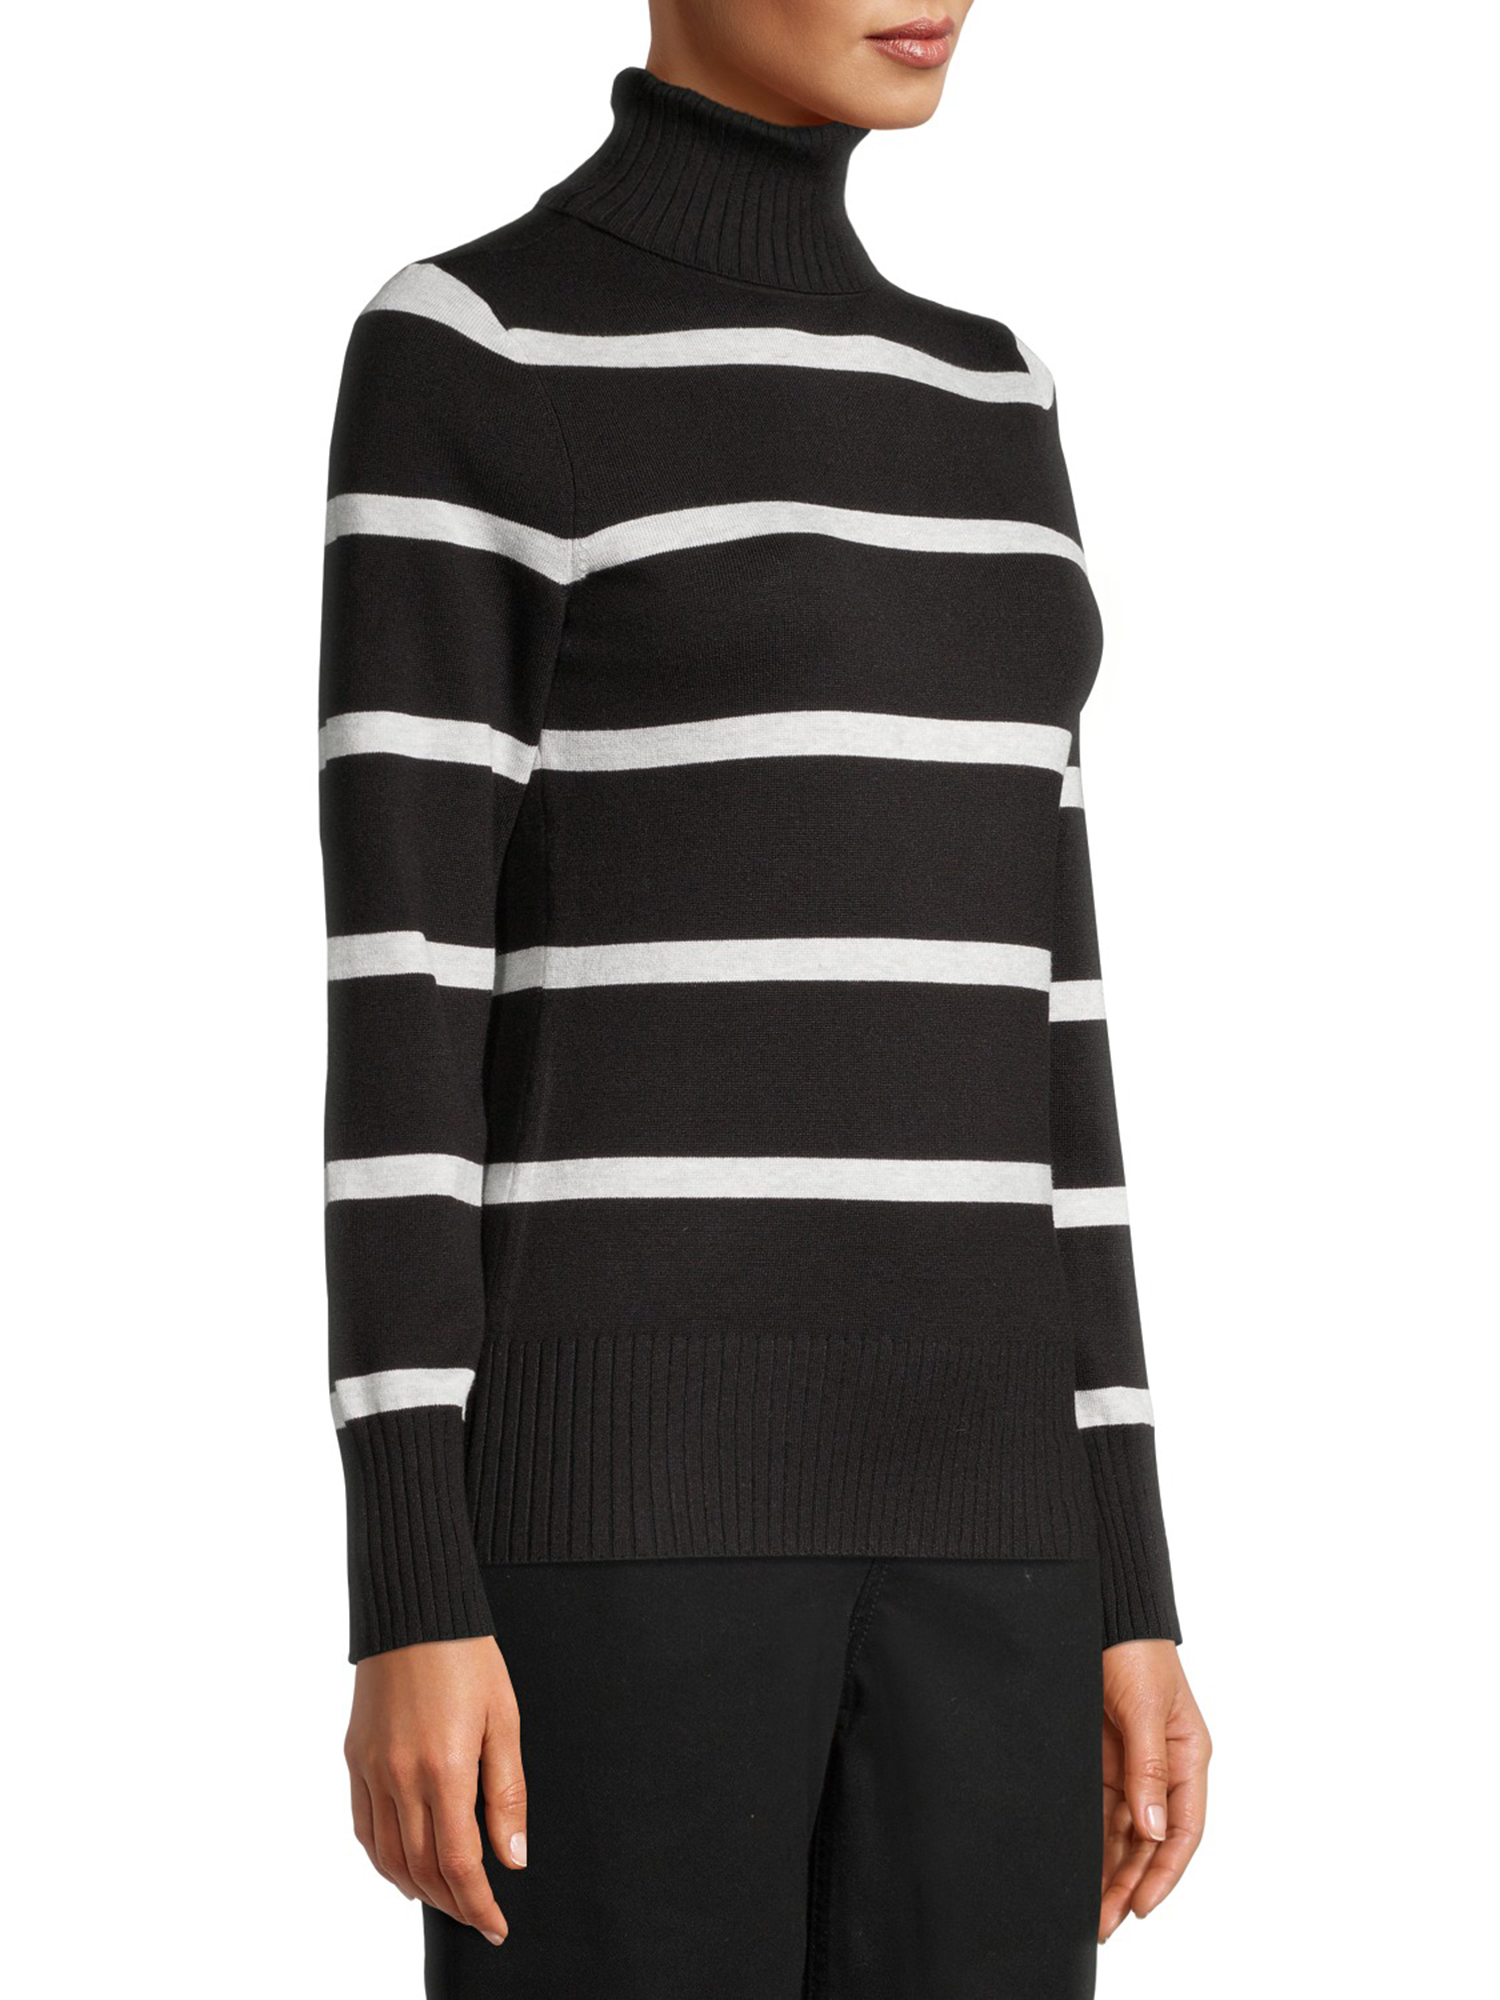 Time and Tru Women's Striped Turtleneck Sweater - image 4 of 6